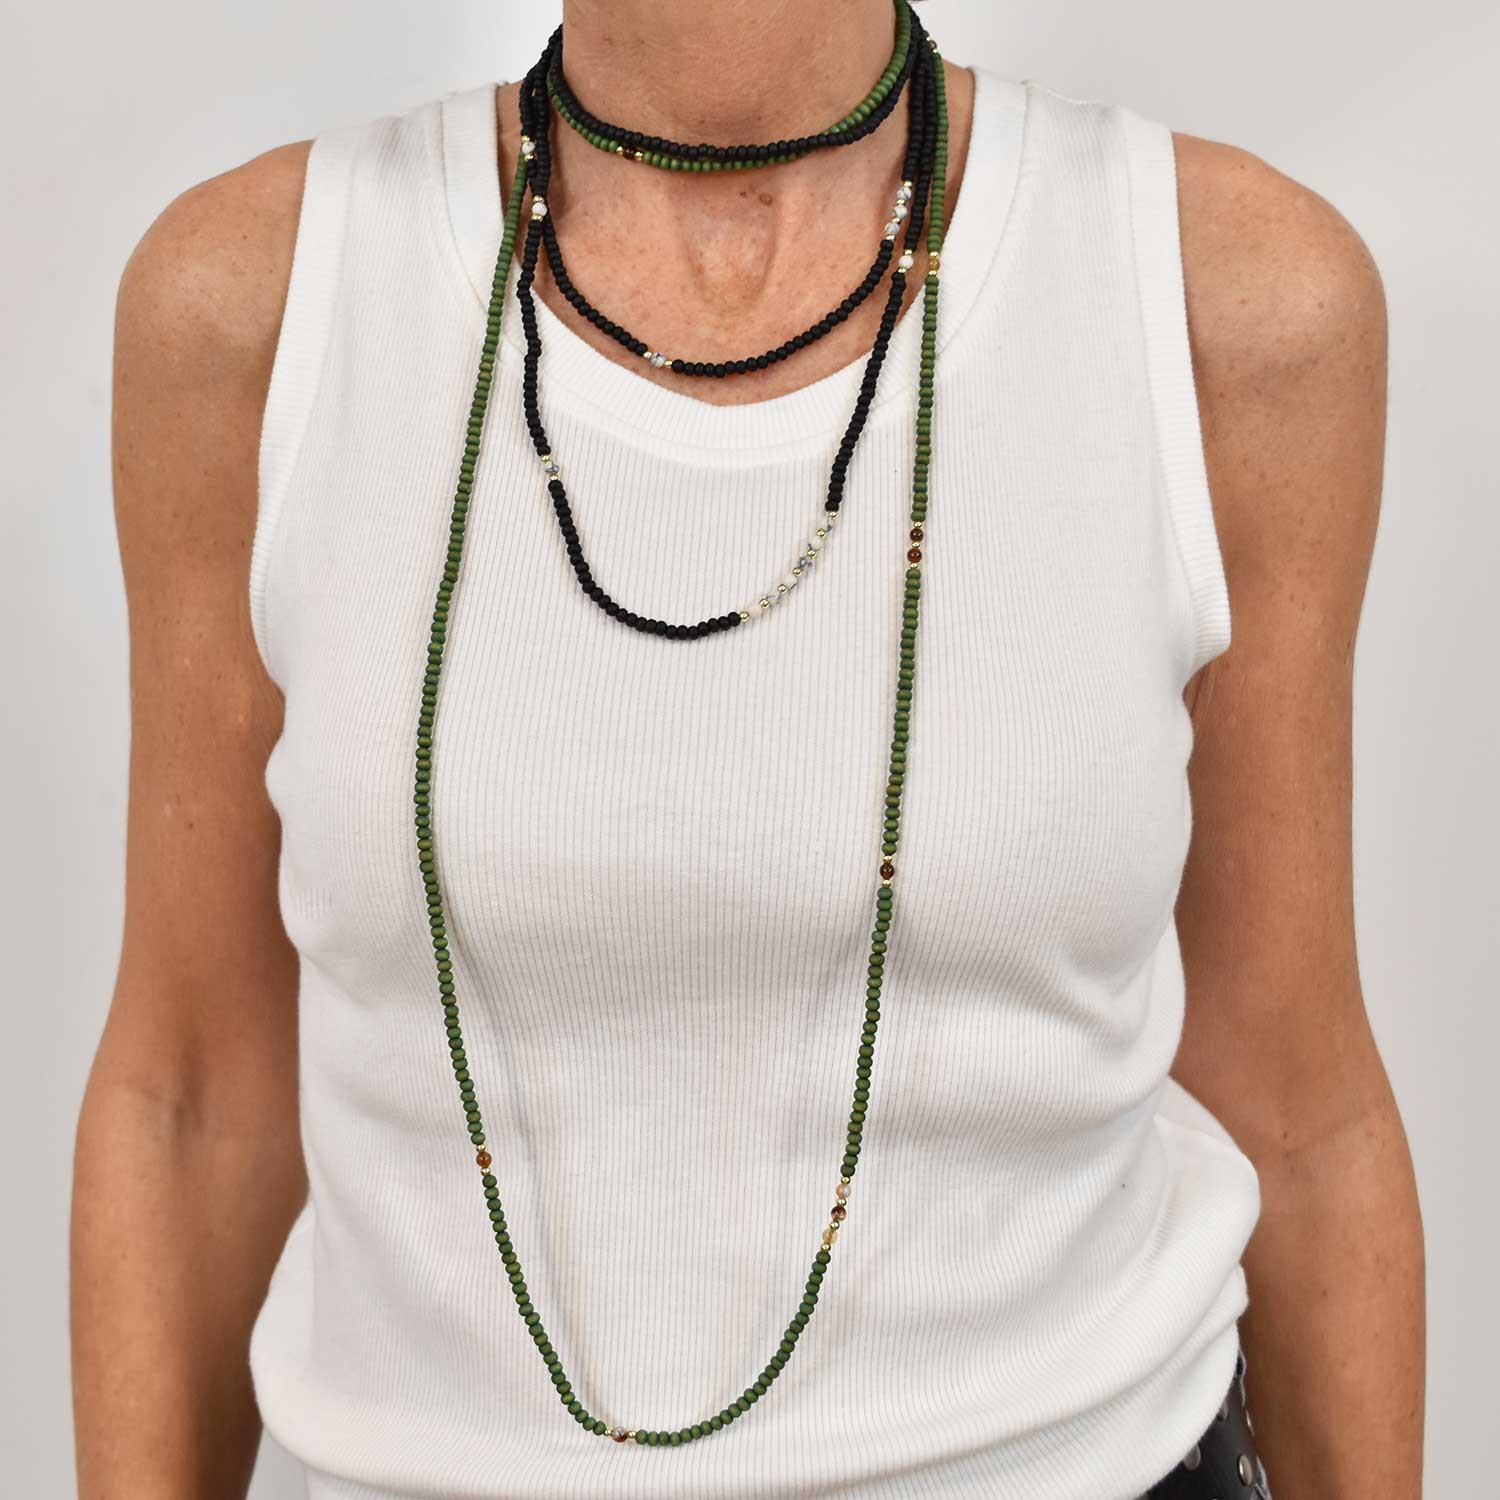 Black long beads necklace